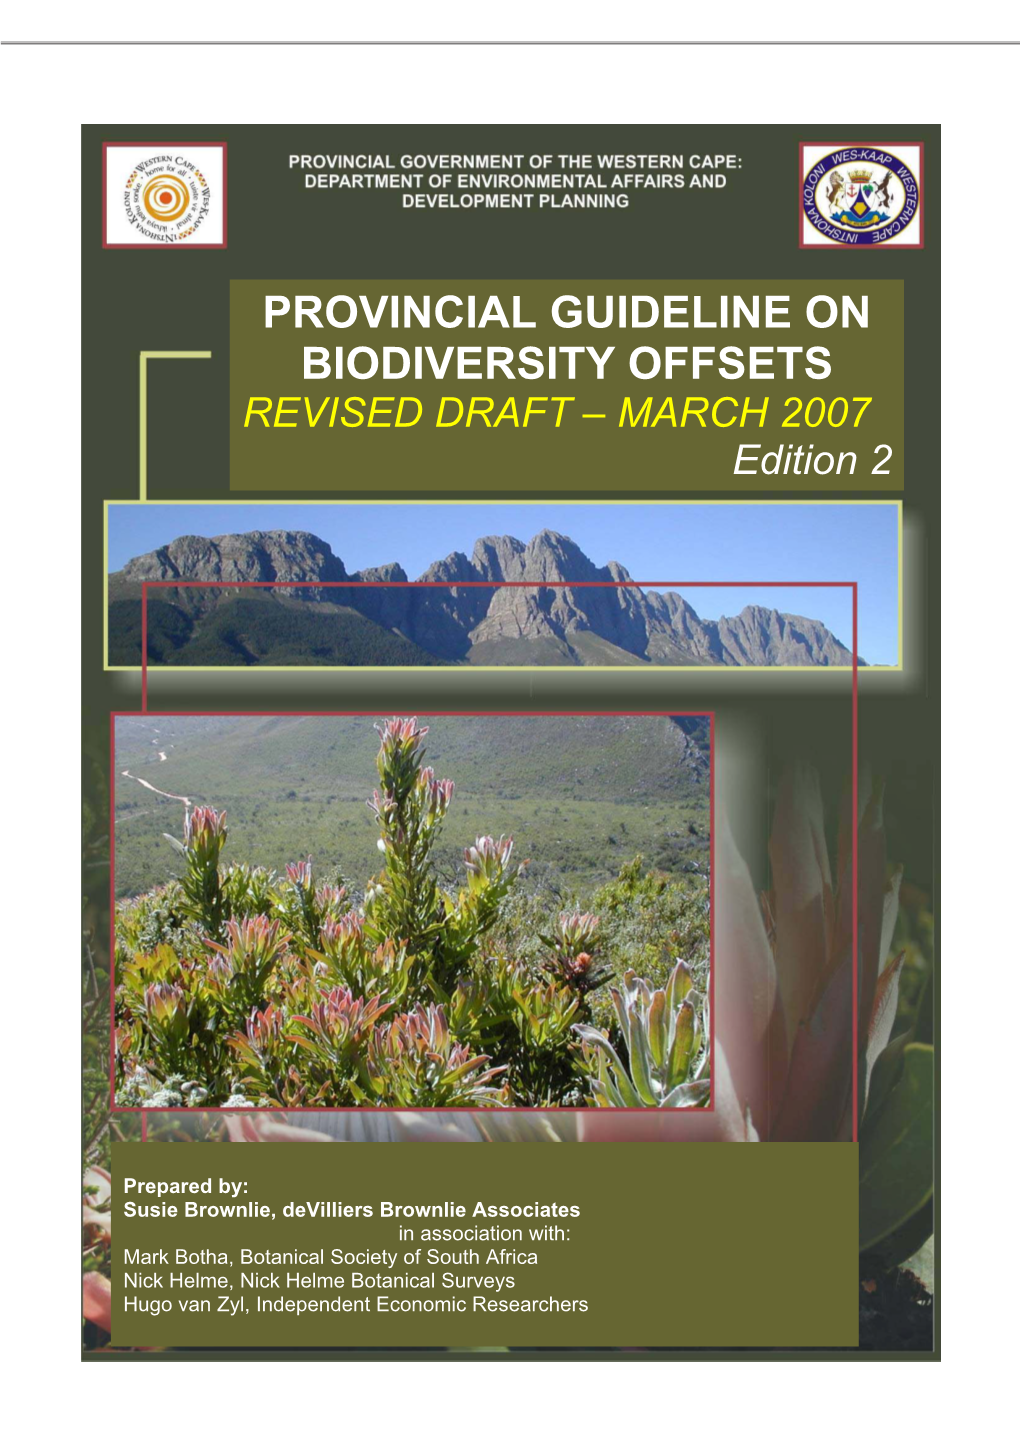 PROVINCIAL GUIDELINE on BIODIVERSITY OFFSETS REVISED DRAFT – MARCH 2007 Edition 2 Utilitas Building, 1 Dorp Street Private Bag X9086 Cape Town 8000 South Africa